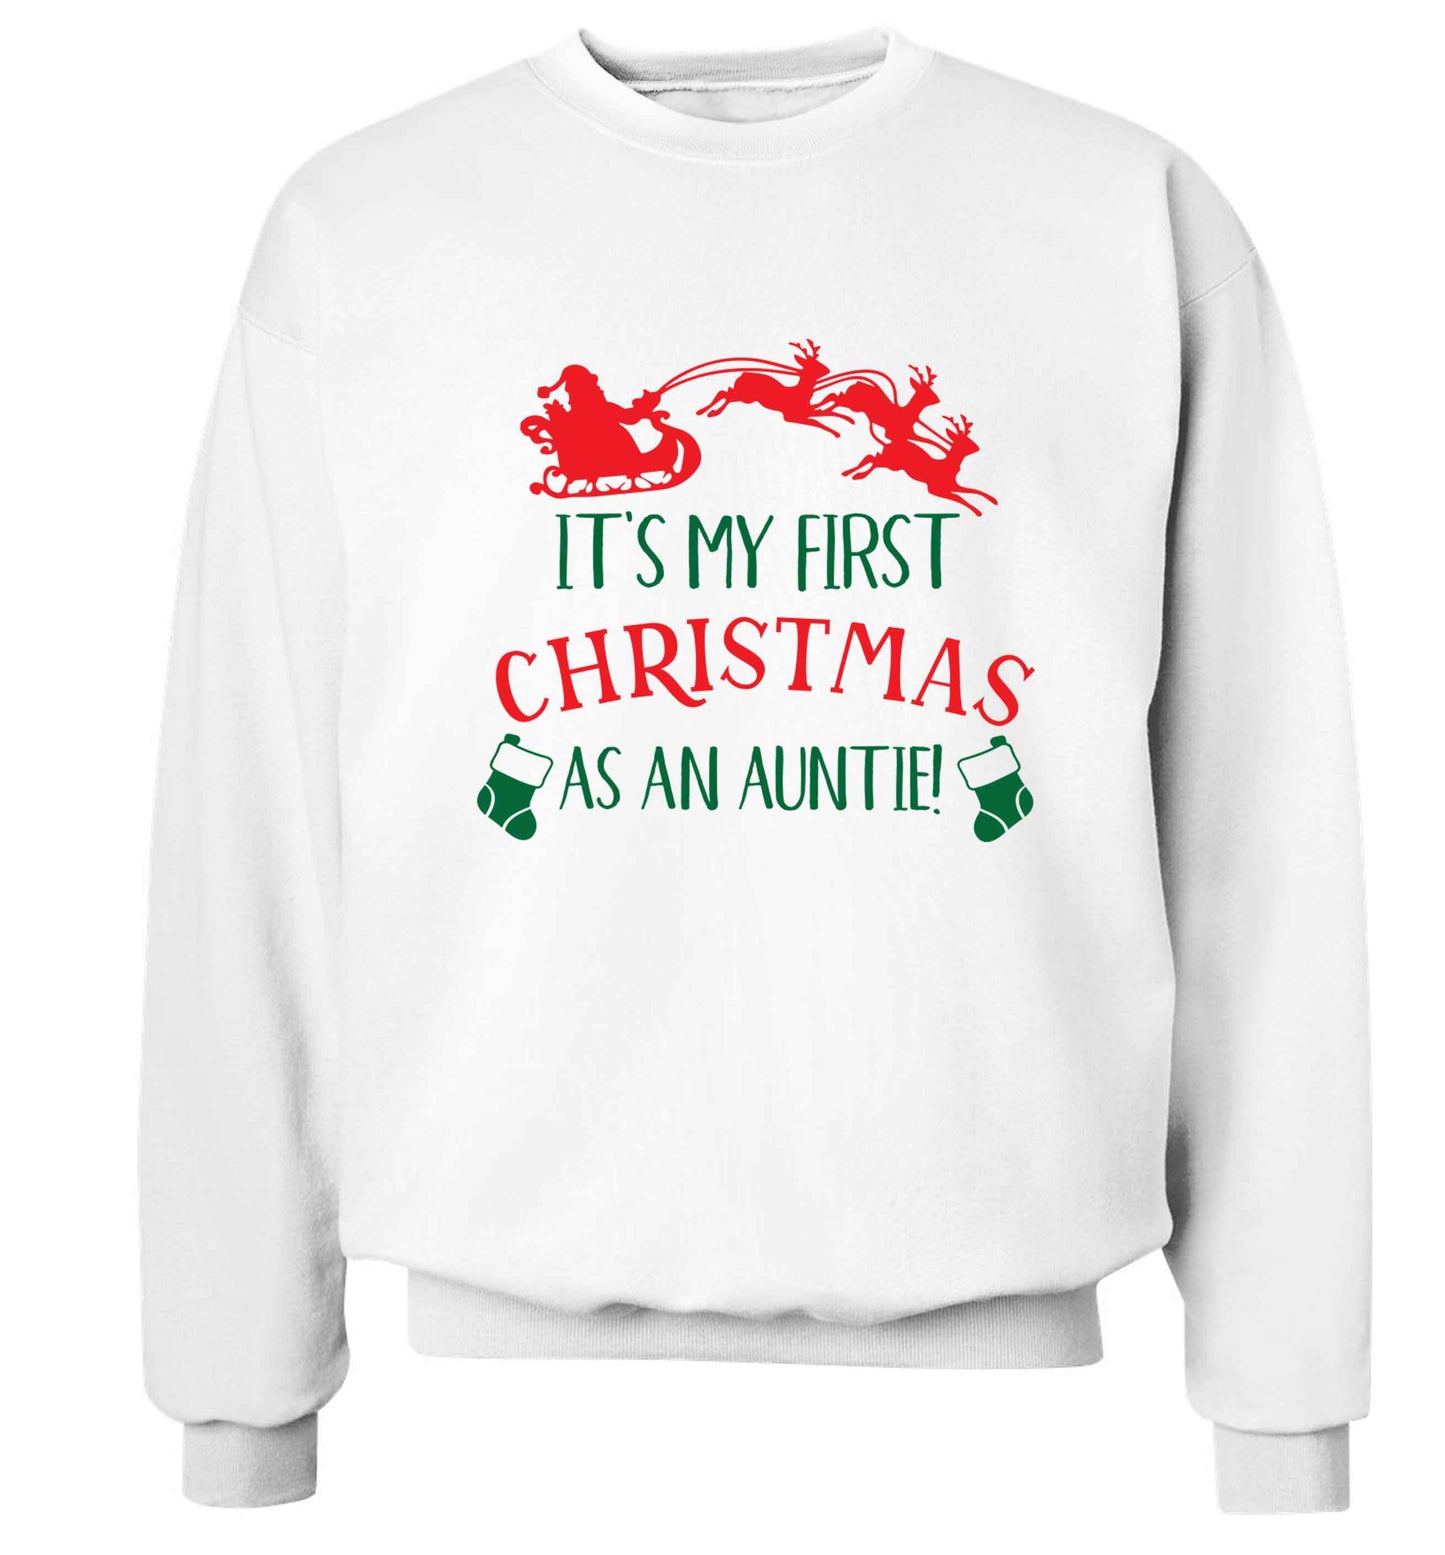 It's my first Christmas as an auntie! Adult's unisex white Sweater 2XL